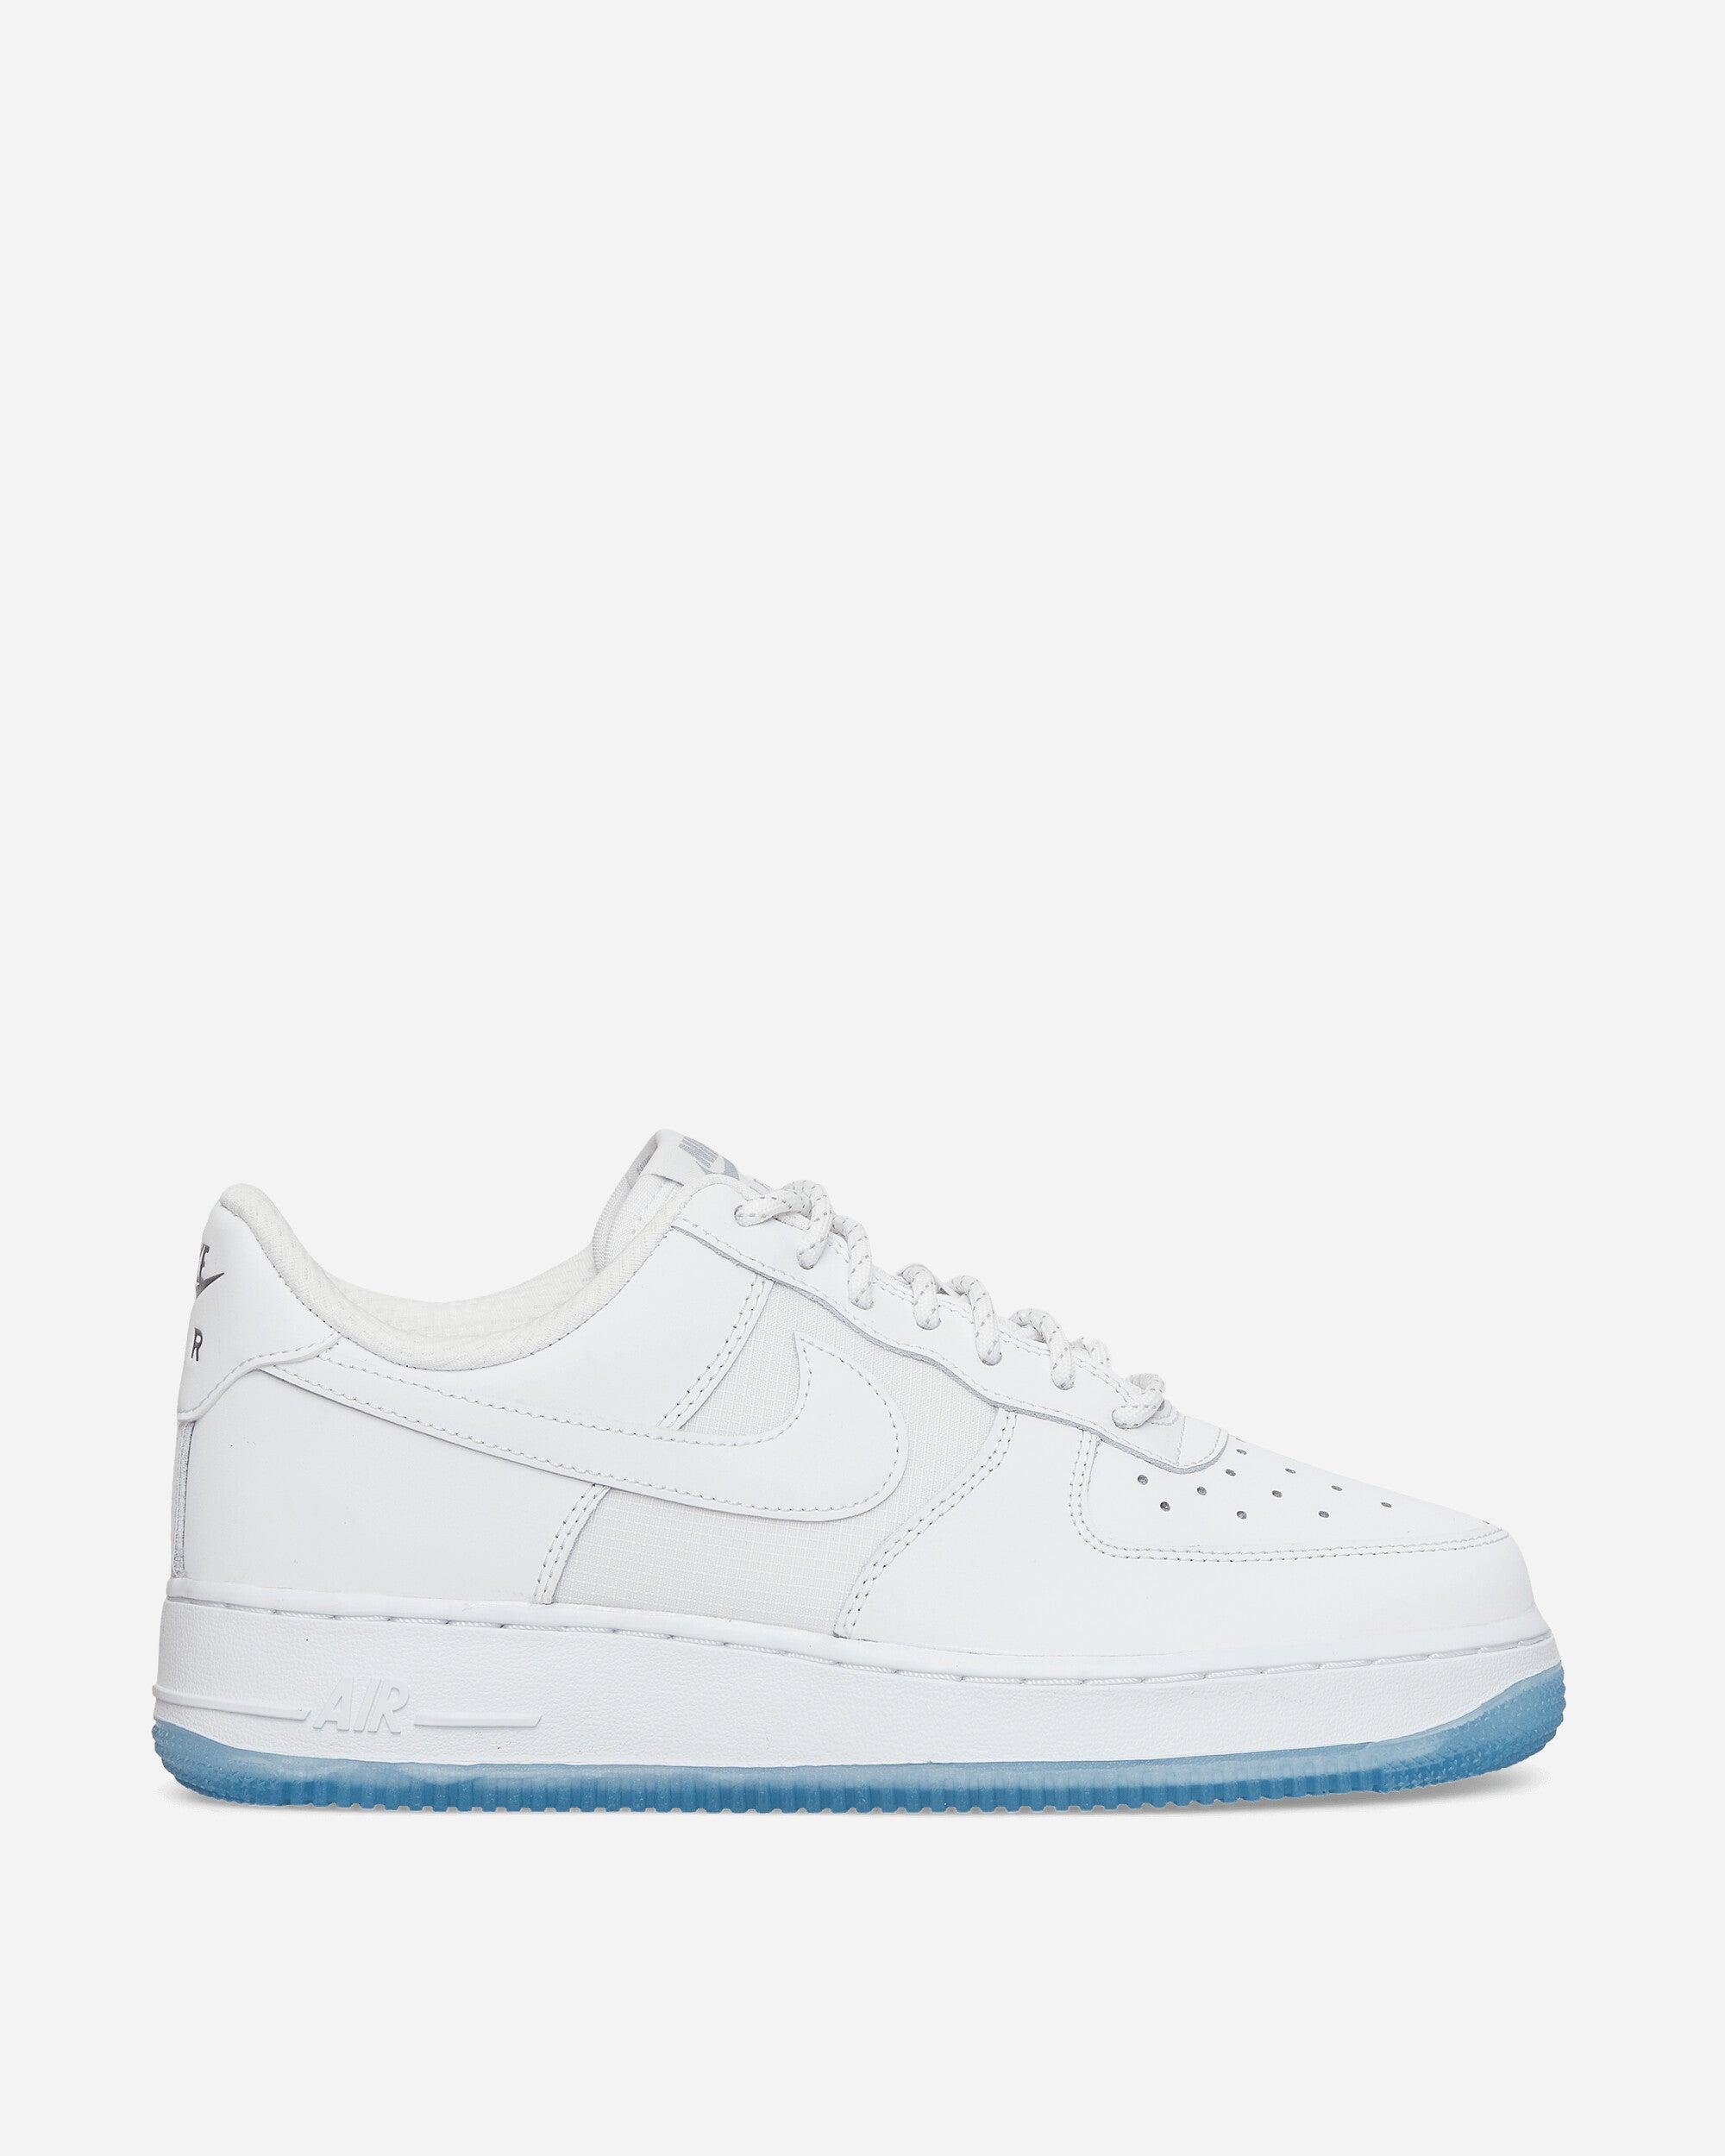 Nike Air Force 1 07 Sneakers White / Icy Blue for Men